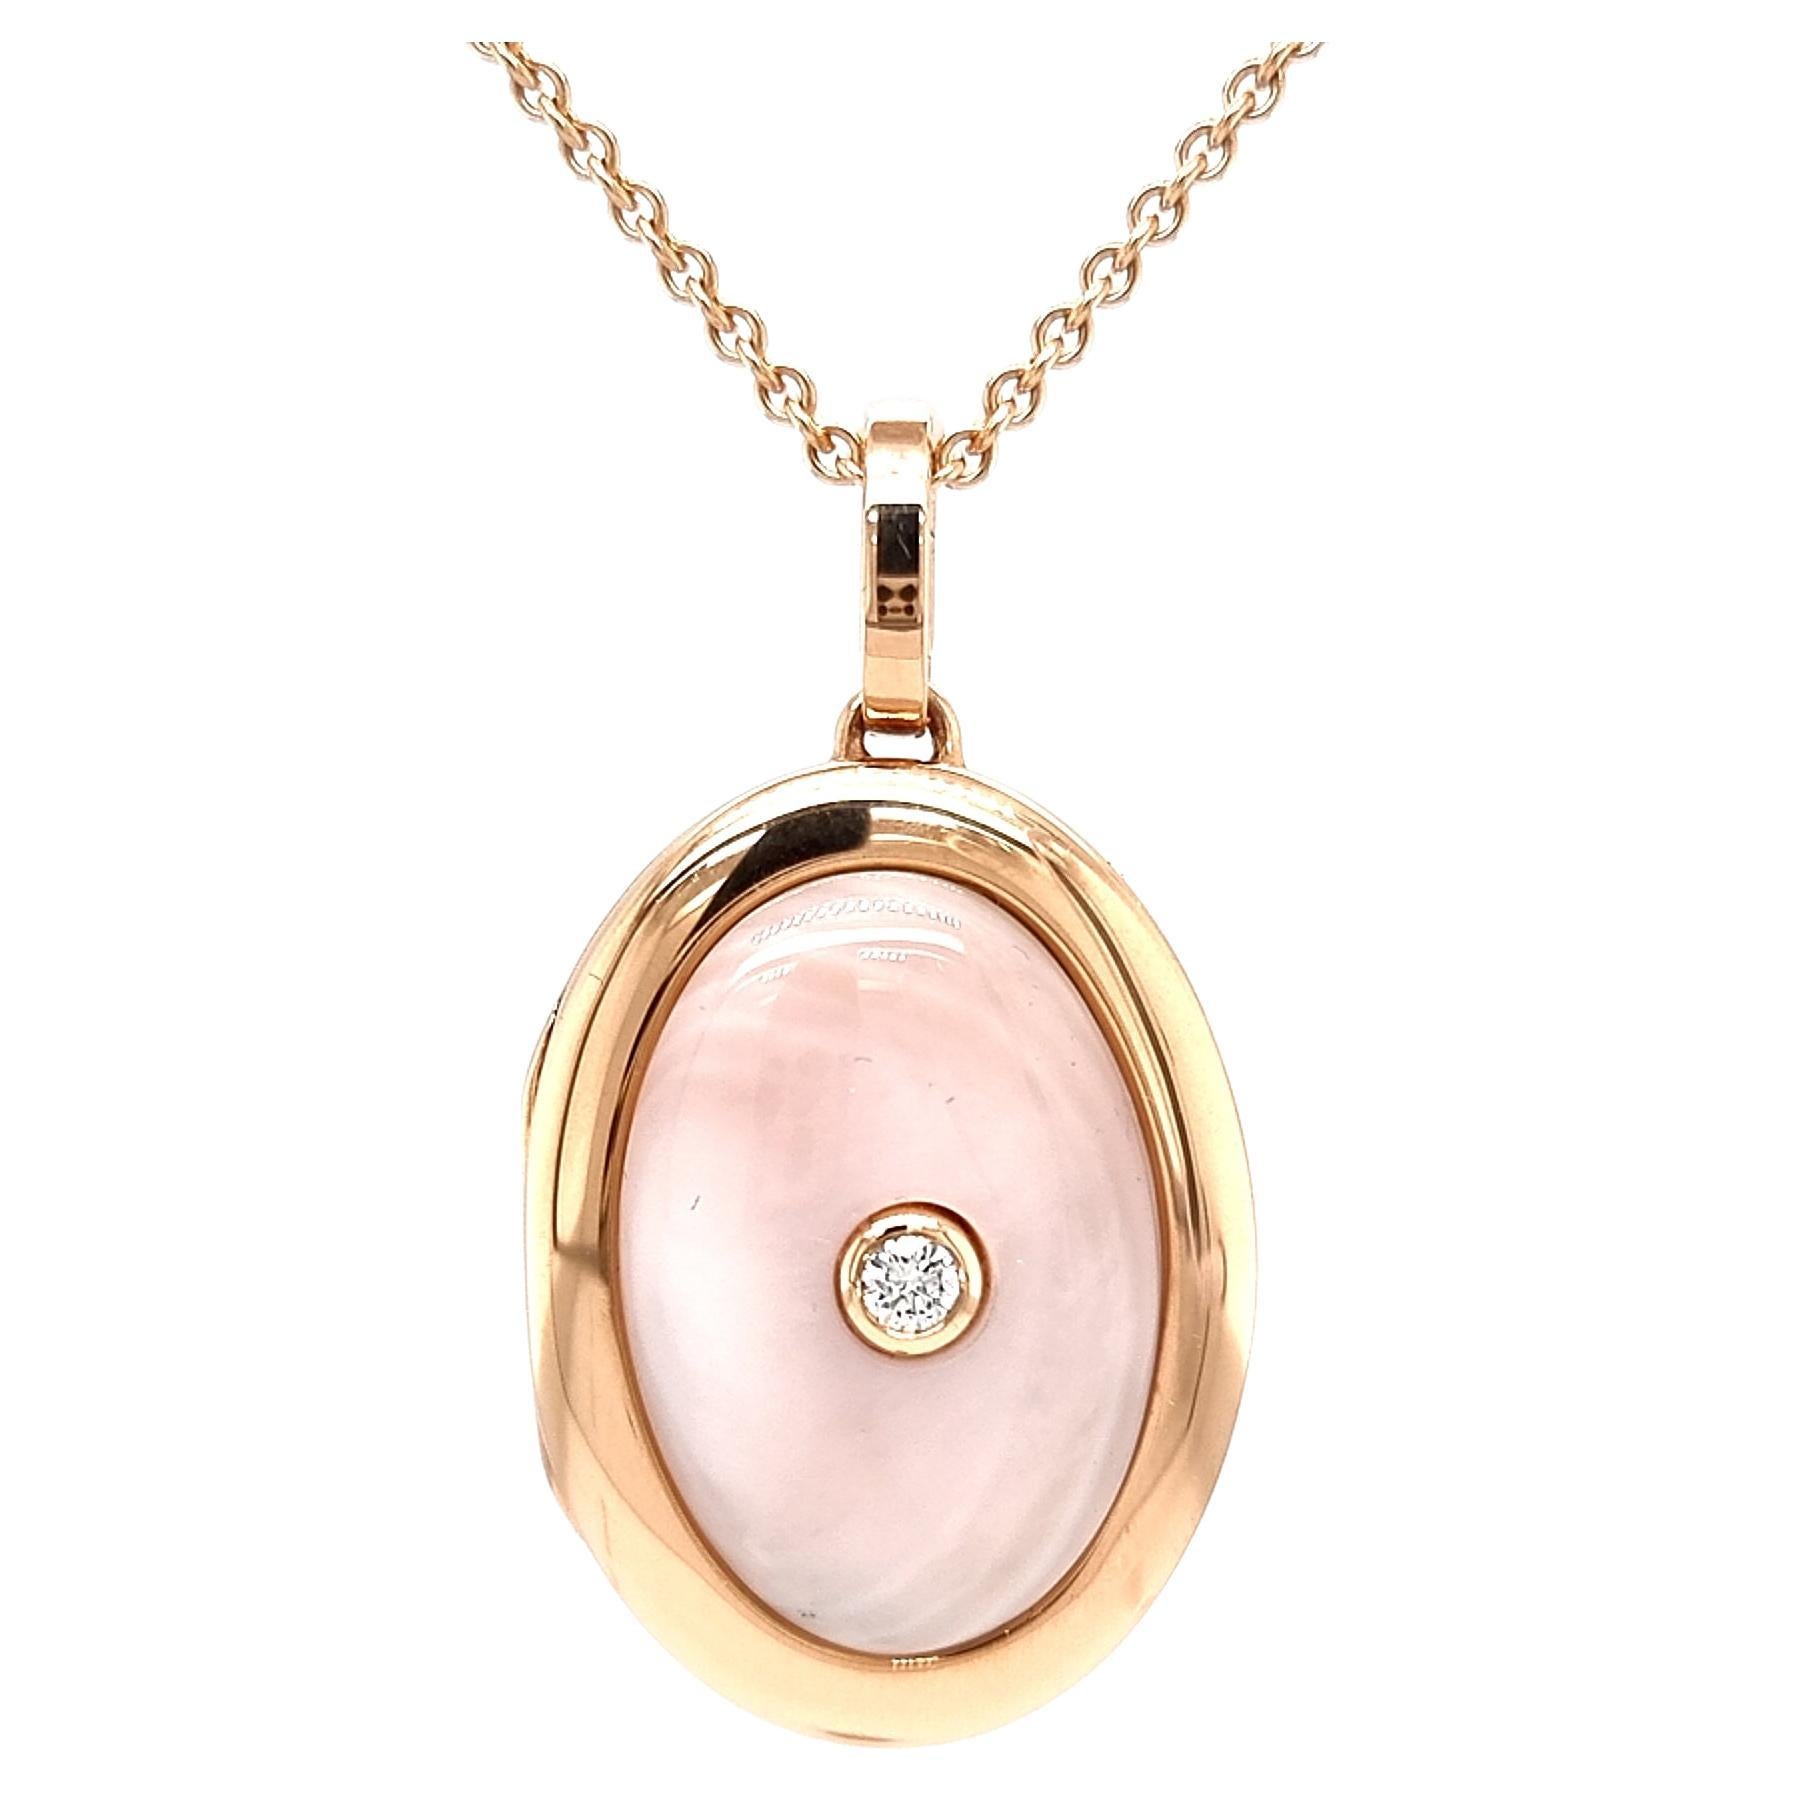 Oval Locket Pendant Necklace - 18k Rose Gold - 1 Diamond 0.10 ct H VS Pink Pearl For Sale